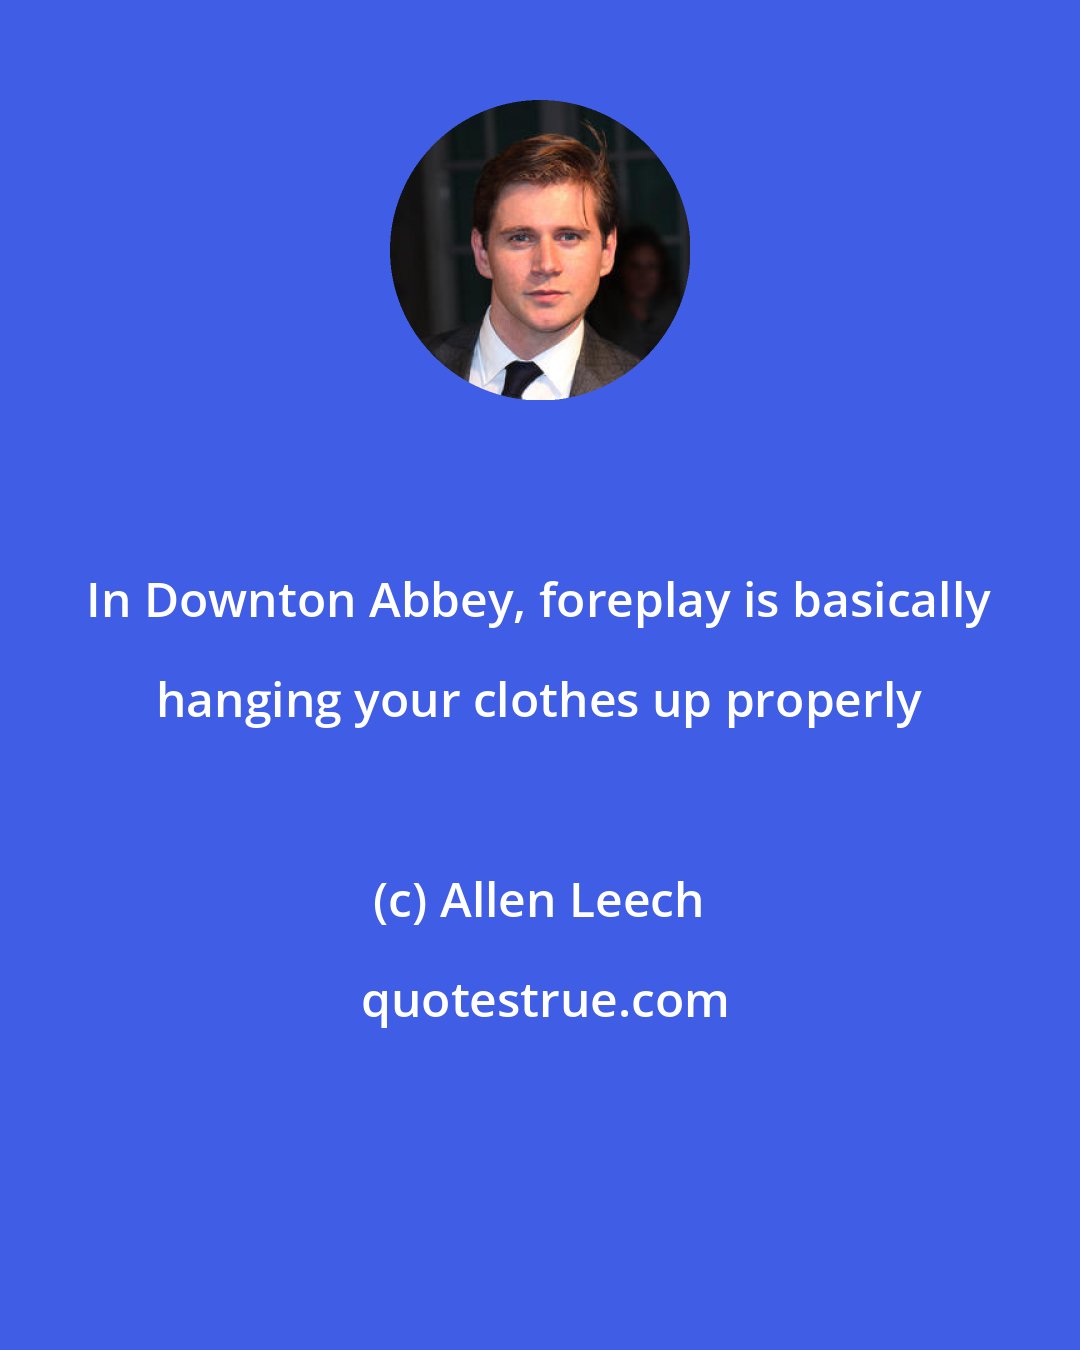 Allen Leech: In Downton Abbey, foreplay is basically hanging your clothes up properly